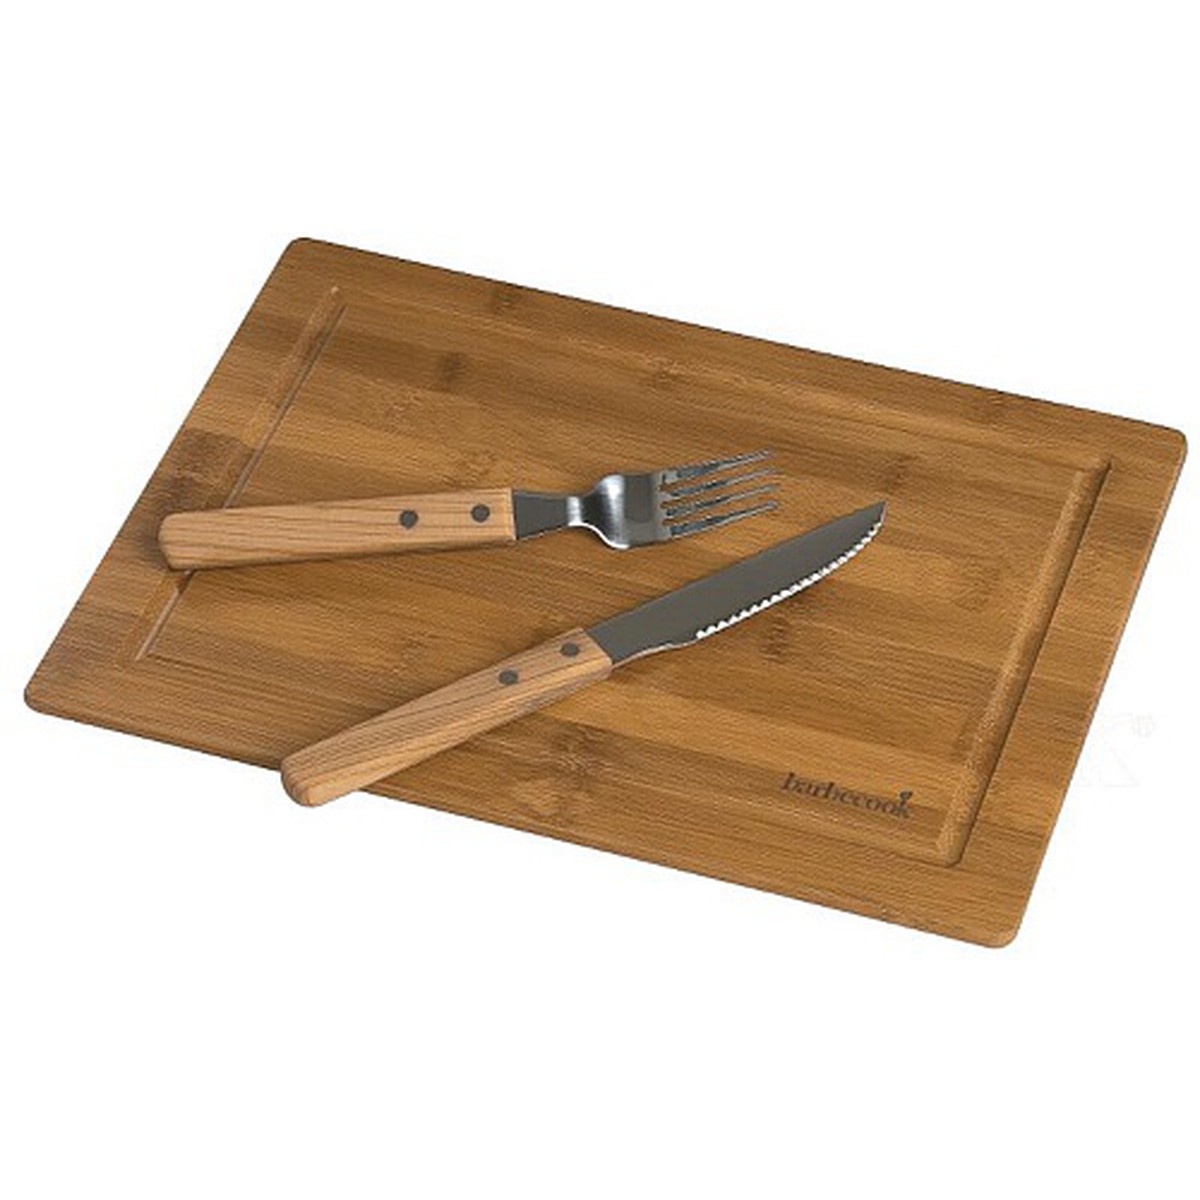 Barbecook  Set bambou 1 personne - 2230017000  30.5x22.5cm